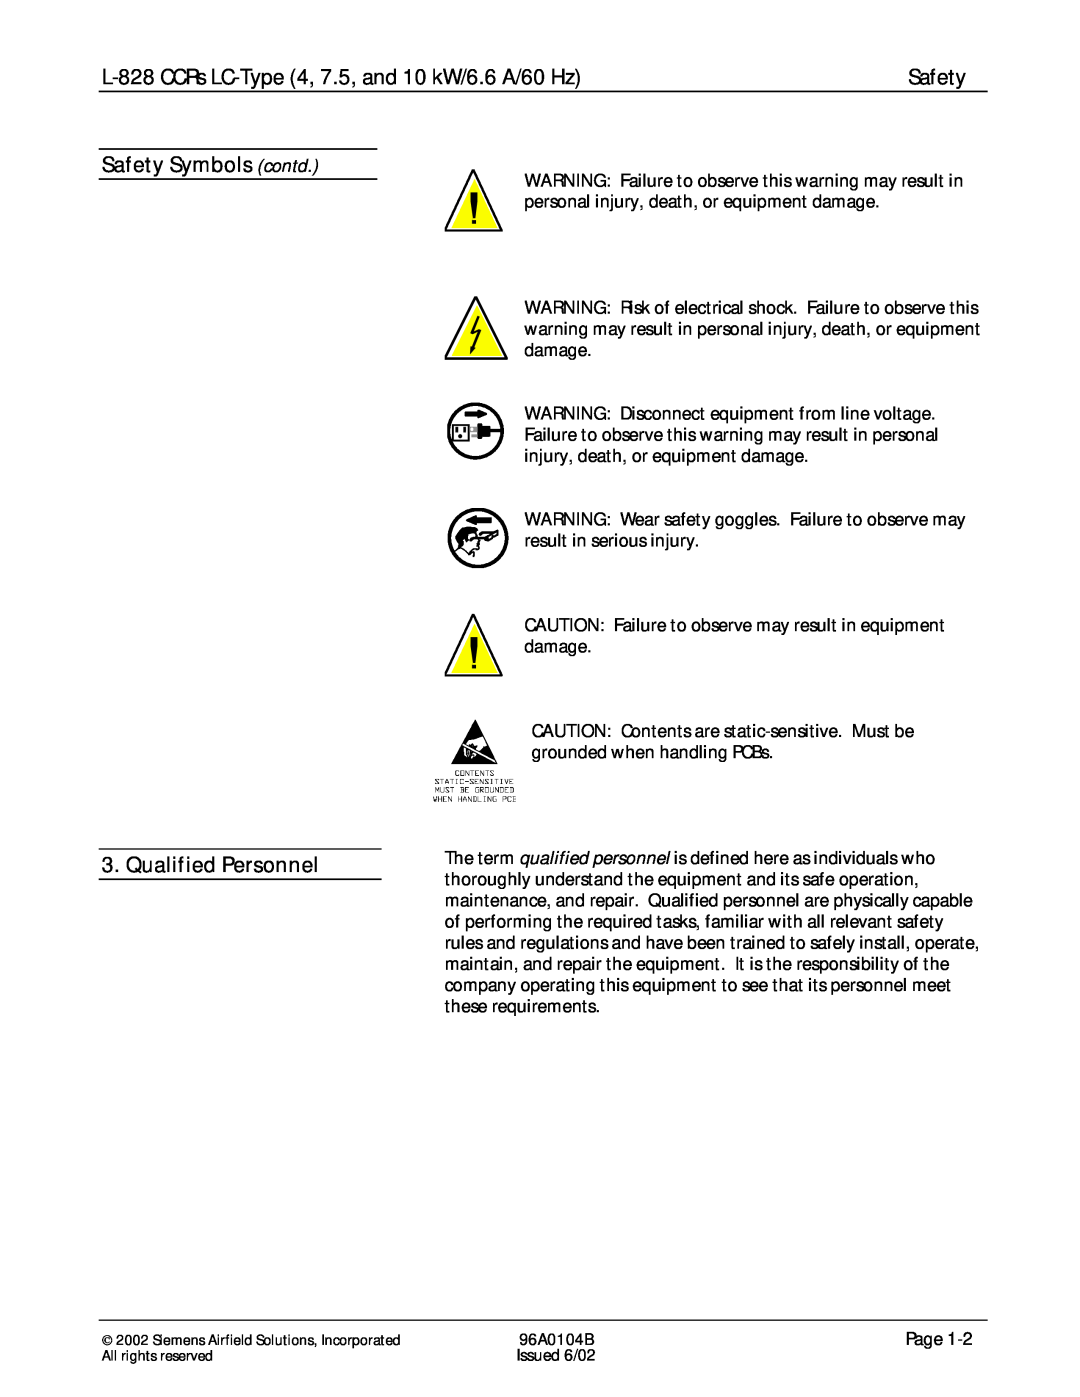 Siemens manual Safety Symbols contd 3. Qualified Personnel, L-828CCRs LC-Type4, 7.5, and 10 kW/6.6 A/60 Hz 